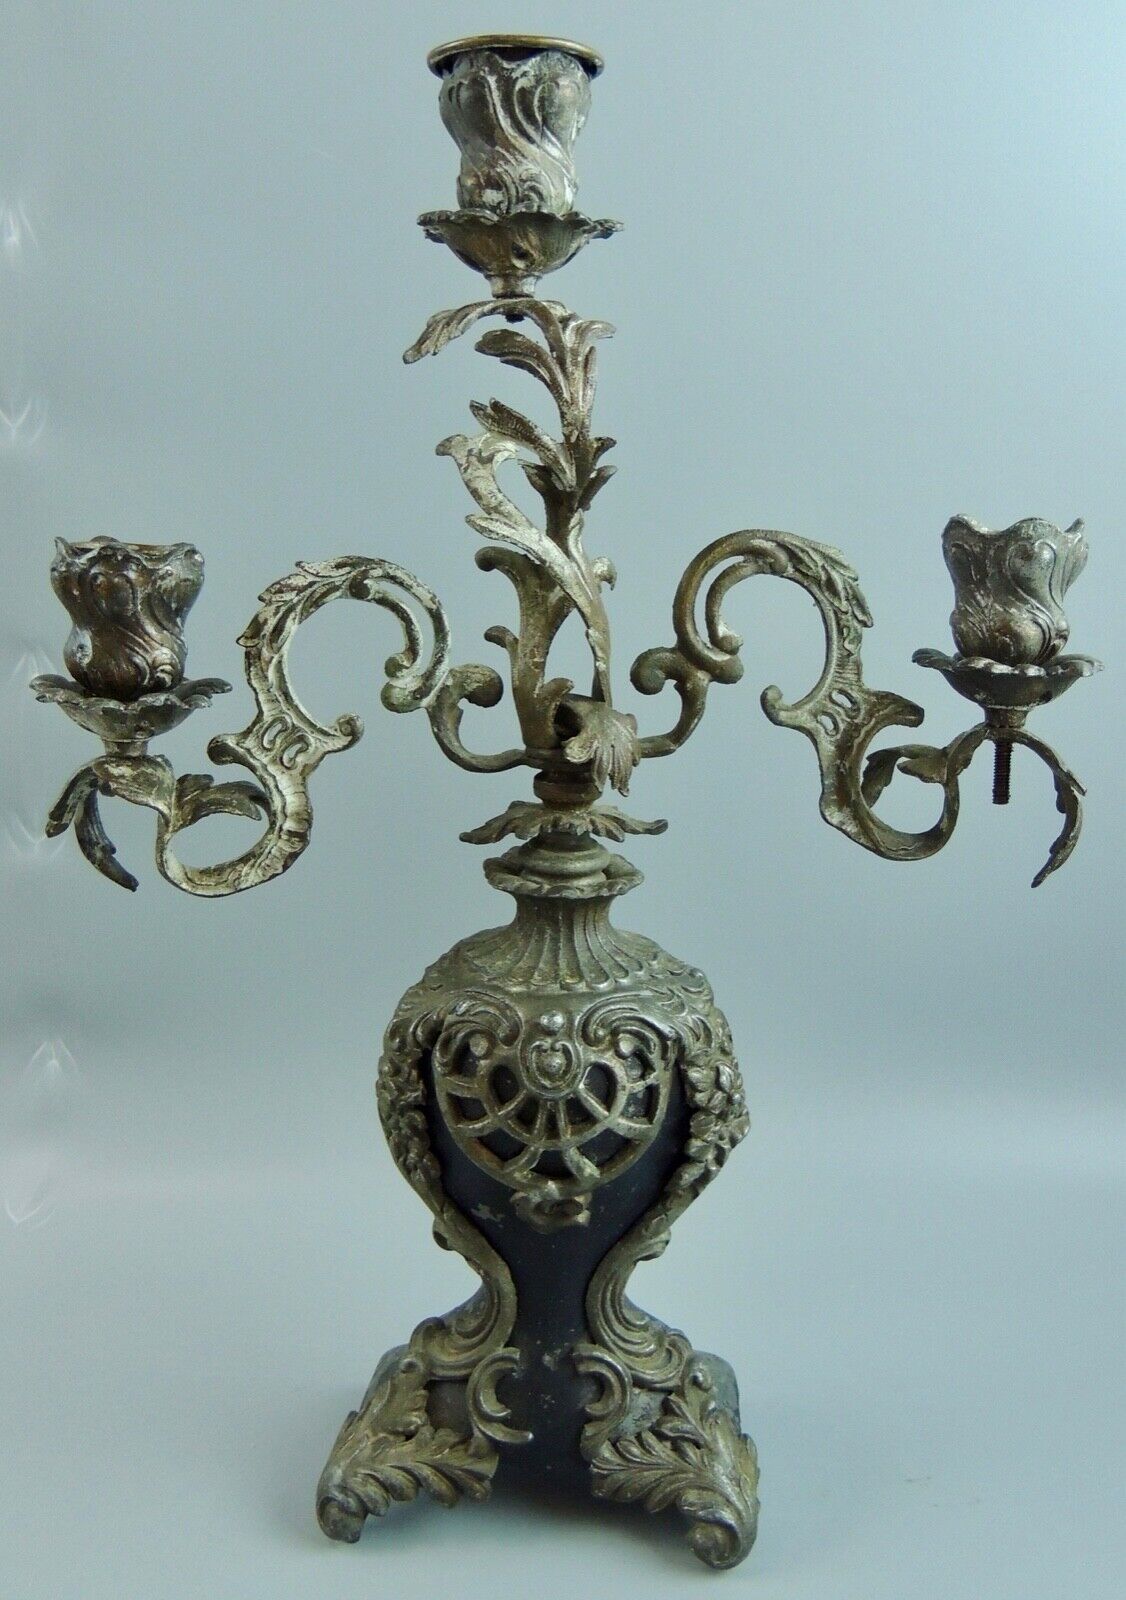 Antique French/Spanish Bronze and Mixed Material Ornate/Filigree Candelabra